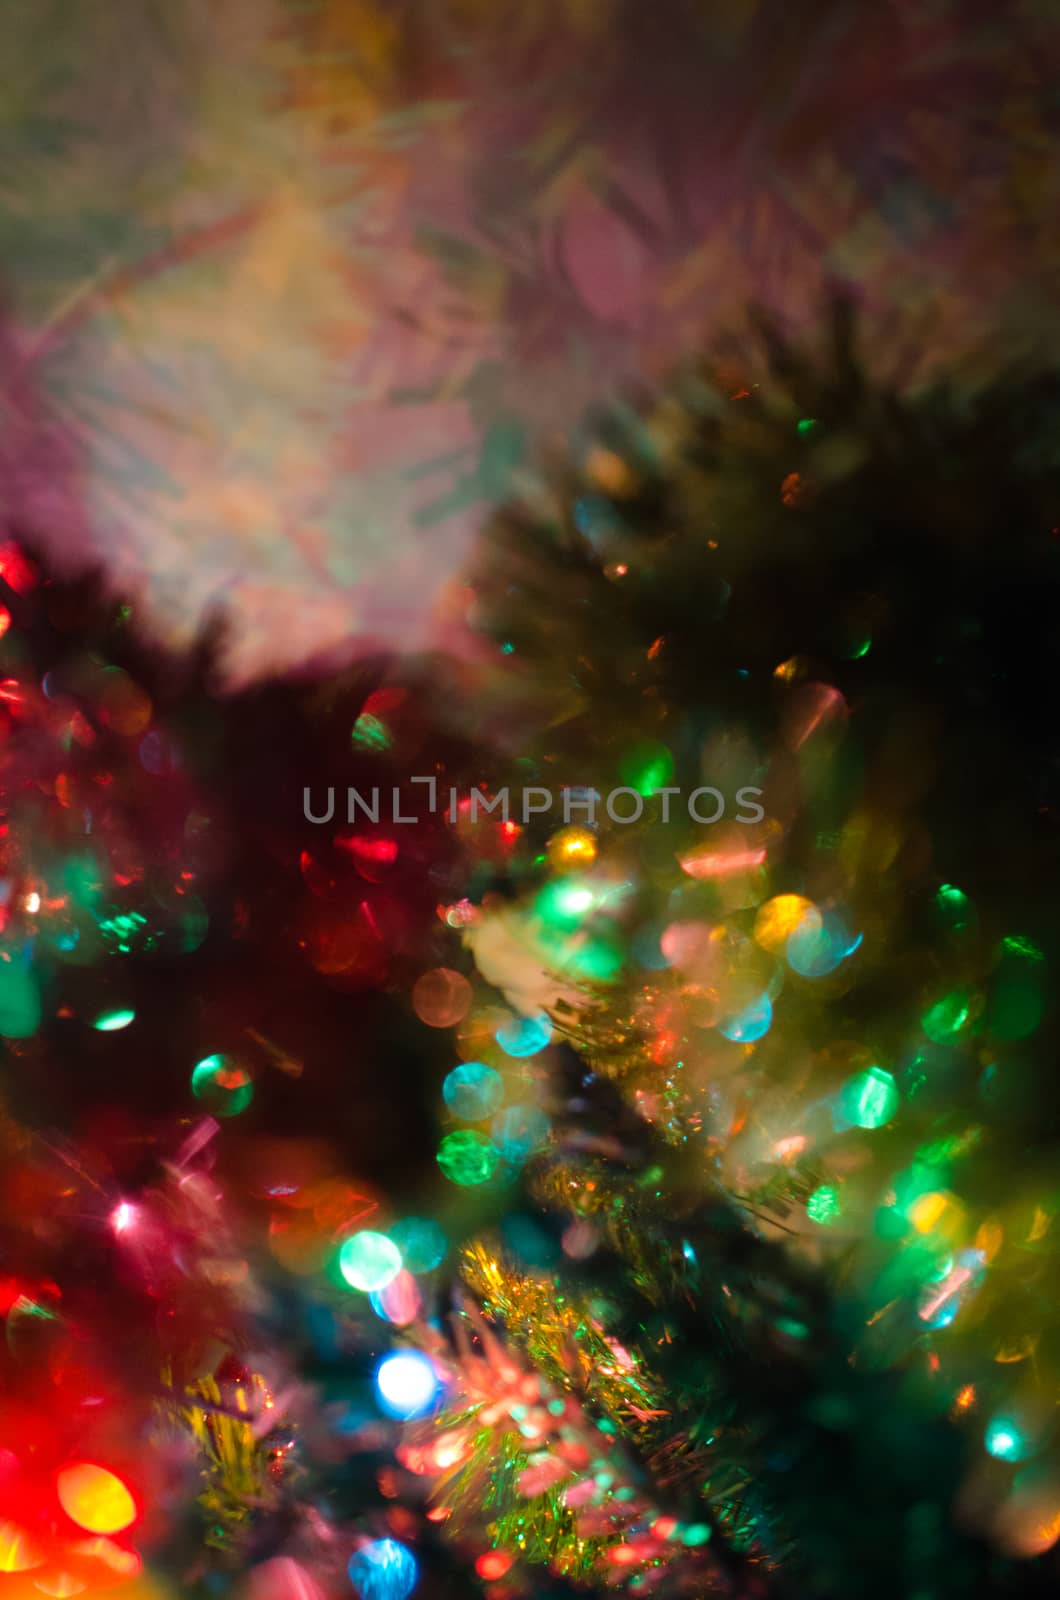 Part of the Christmas tree and lights form an abstract colorful image